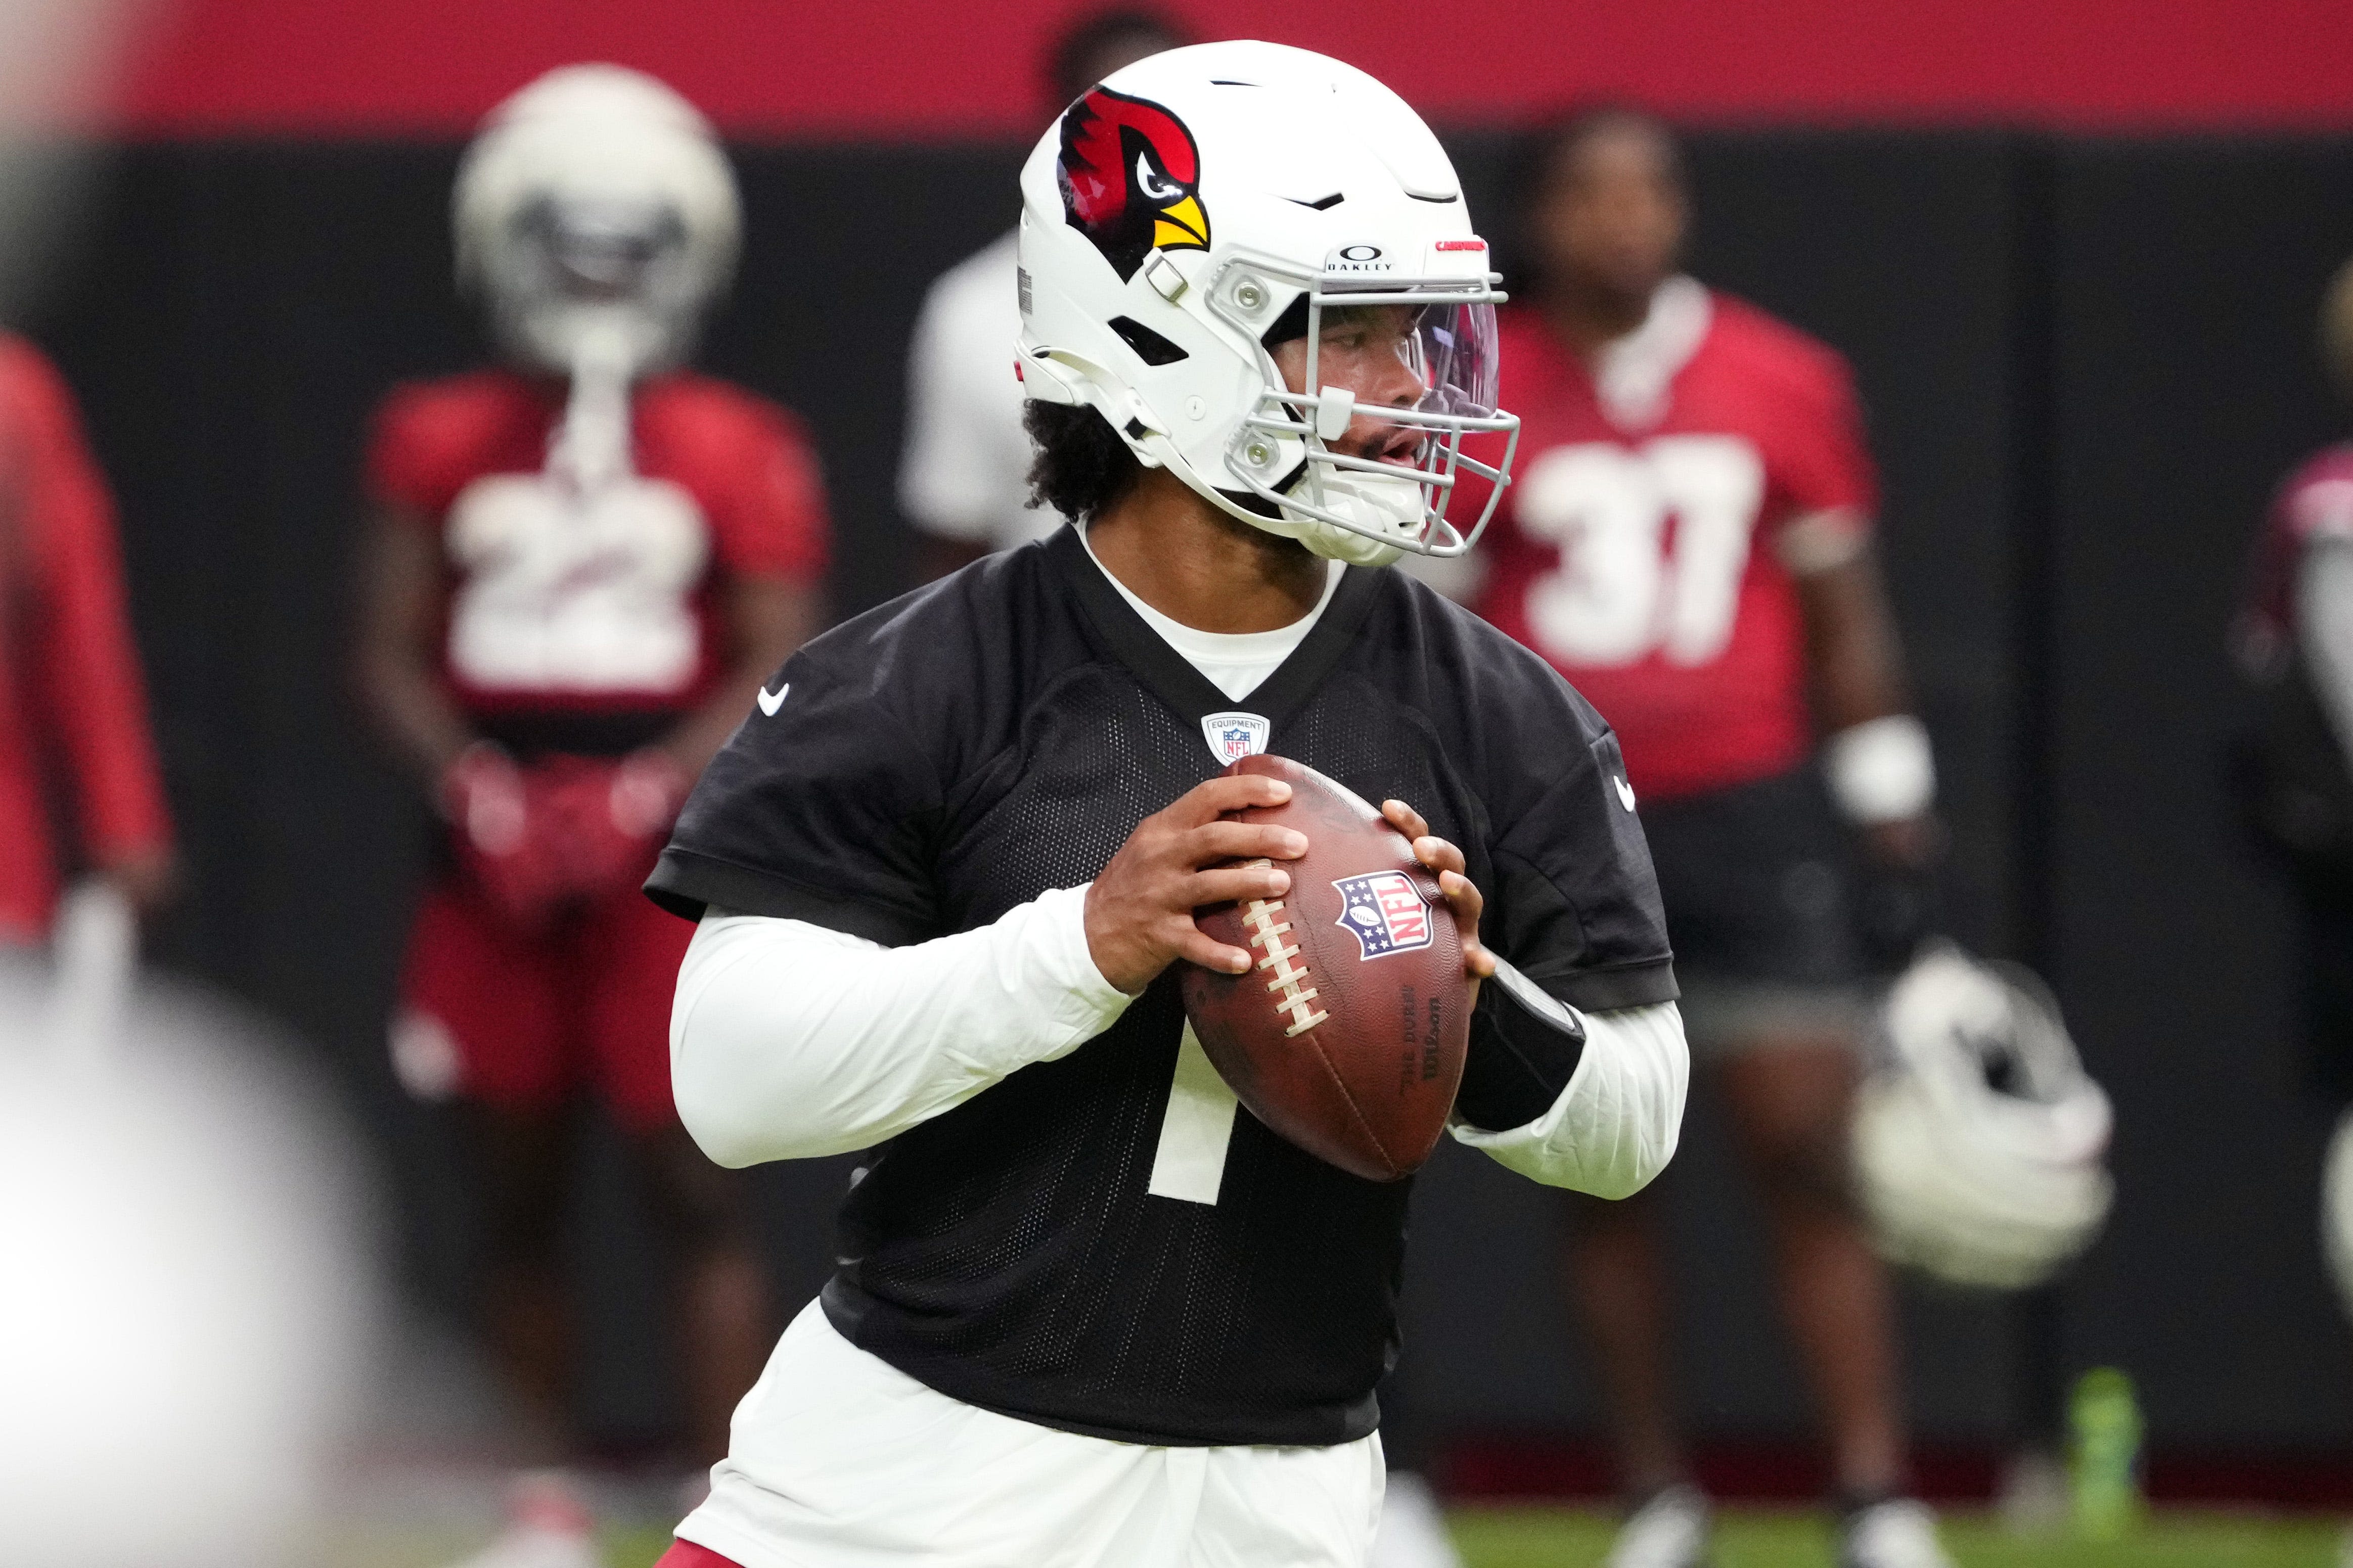 For Arizona Cardinals, a healthy Kyler Murray opens up new offensive possibilities